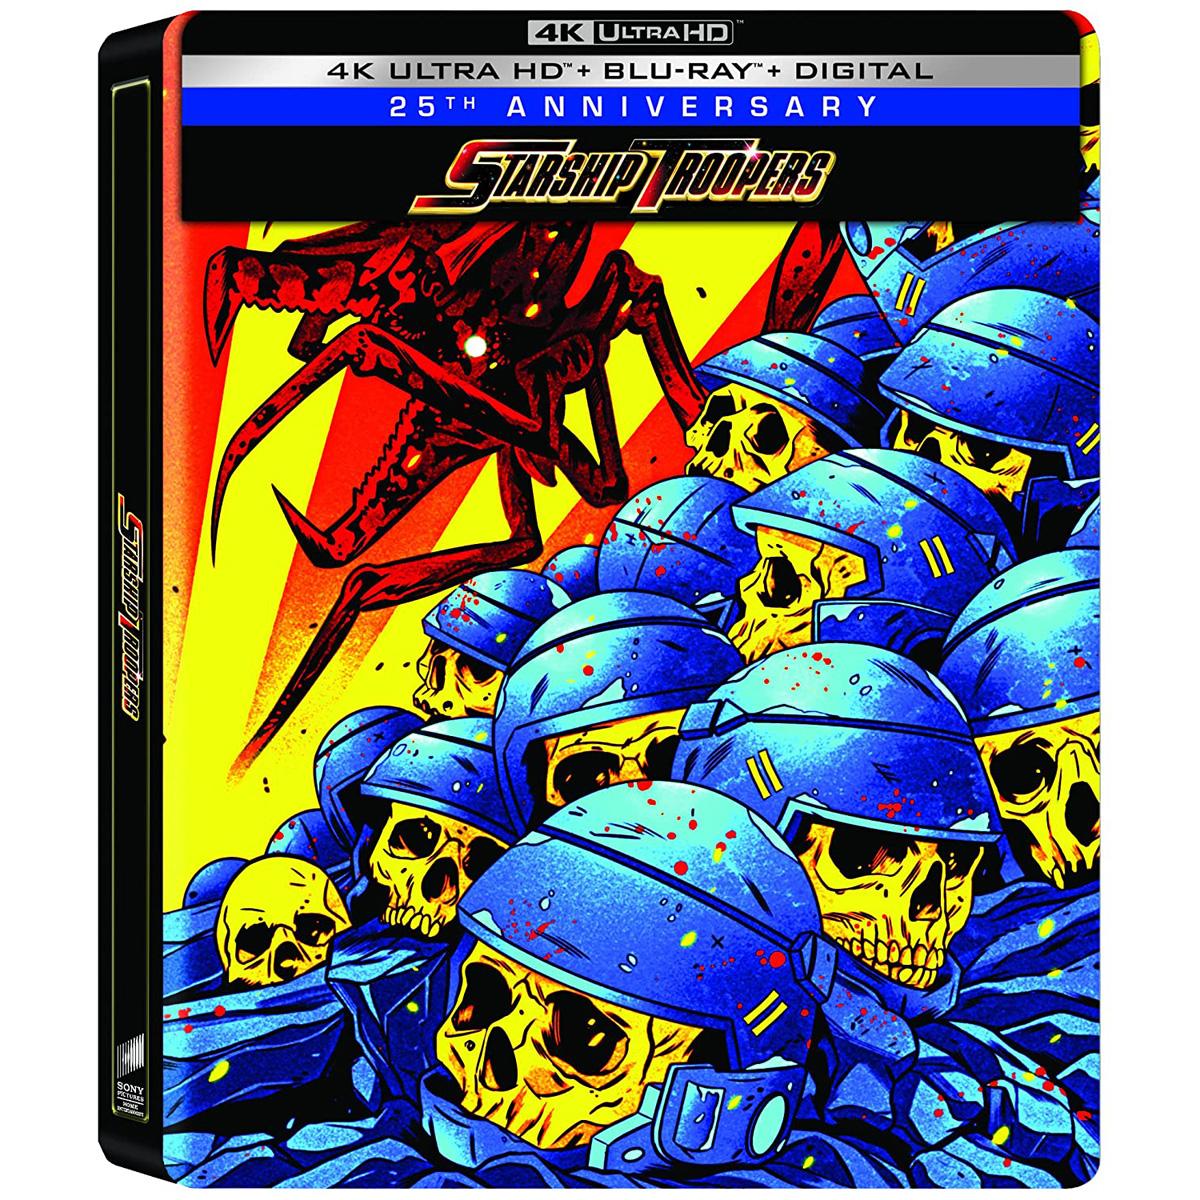 Starship Troopers 25th Anniversary SteelBook Blu-ray for $26.55 Shipped